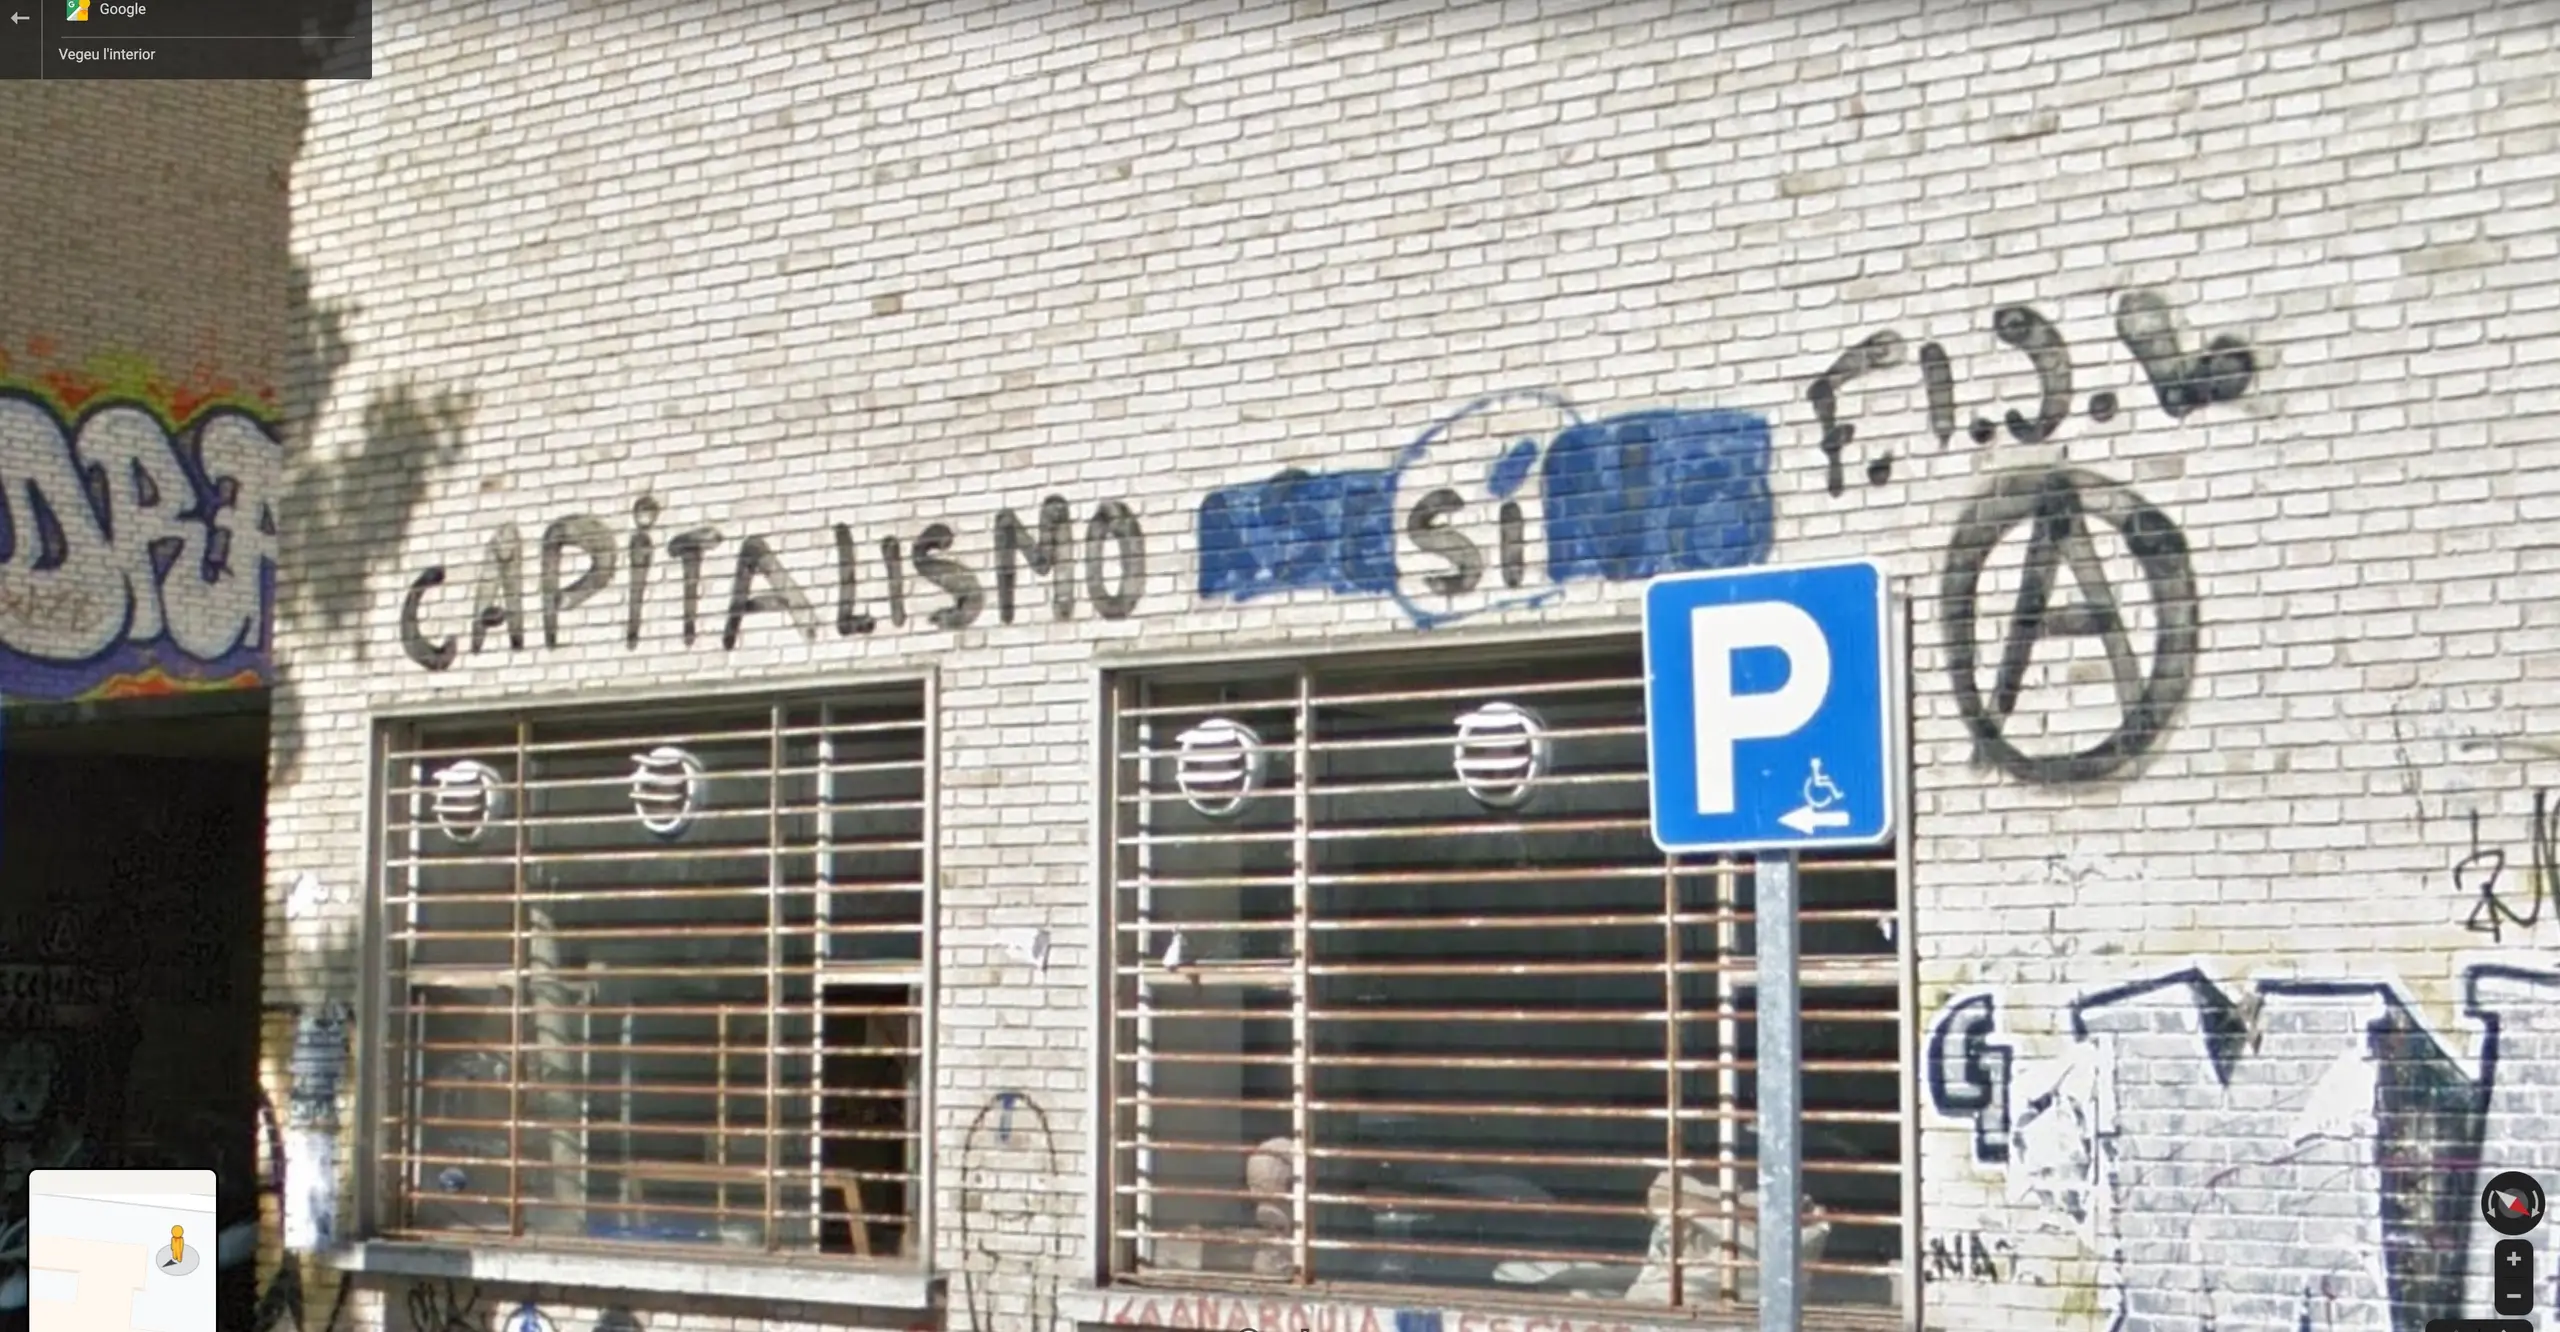 A screenshot of a the façade of a building on Google Street View with 'capitalismo si' graffitied 